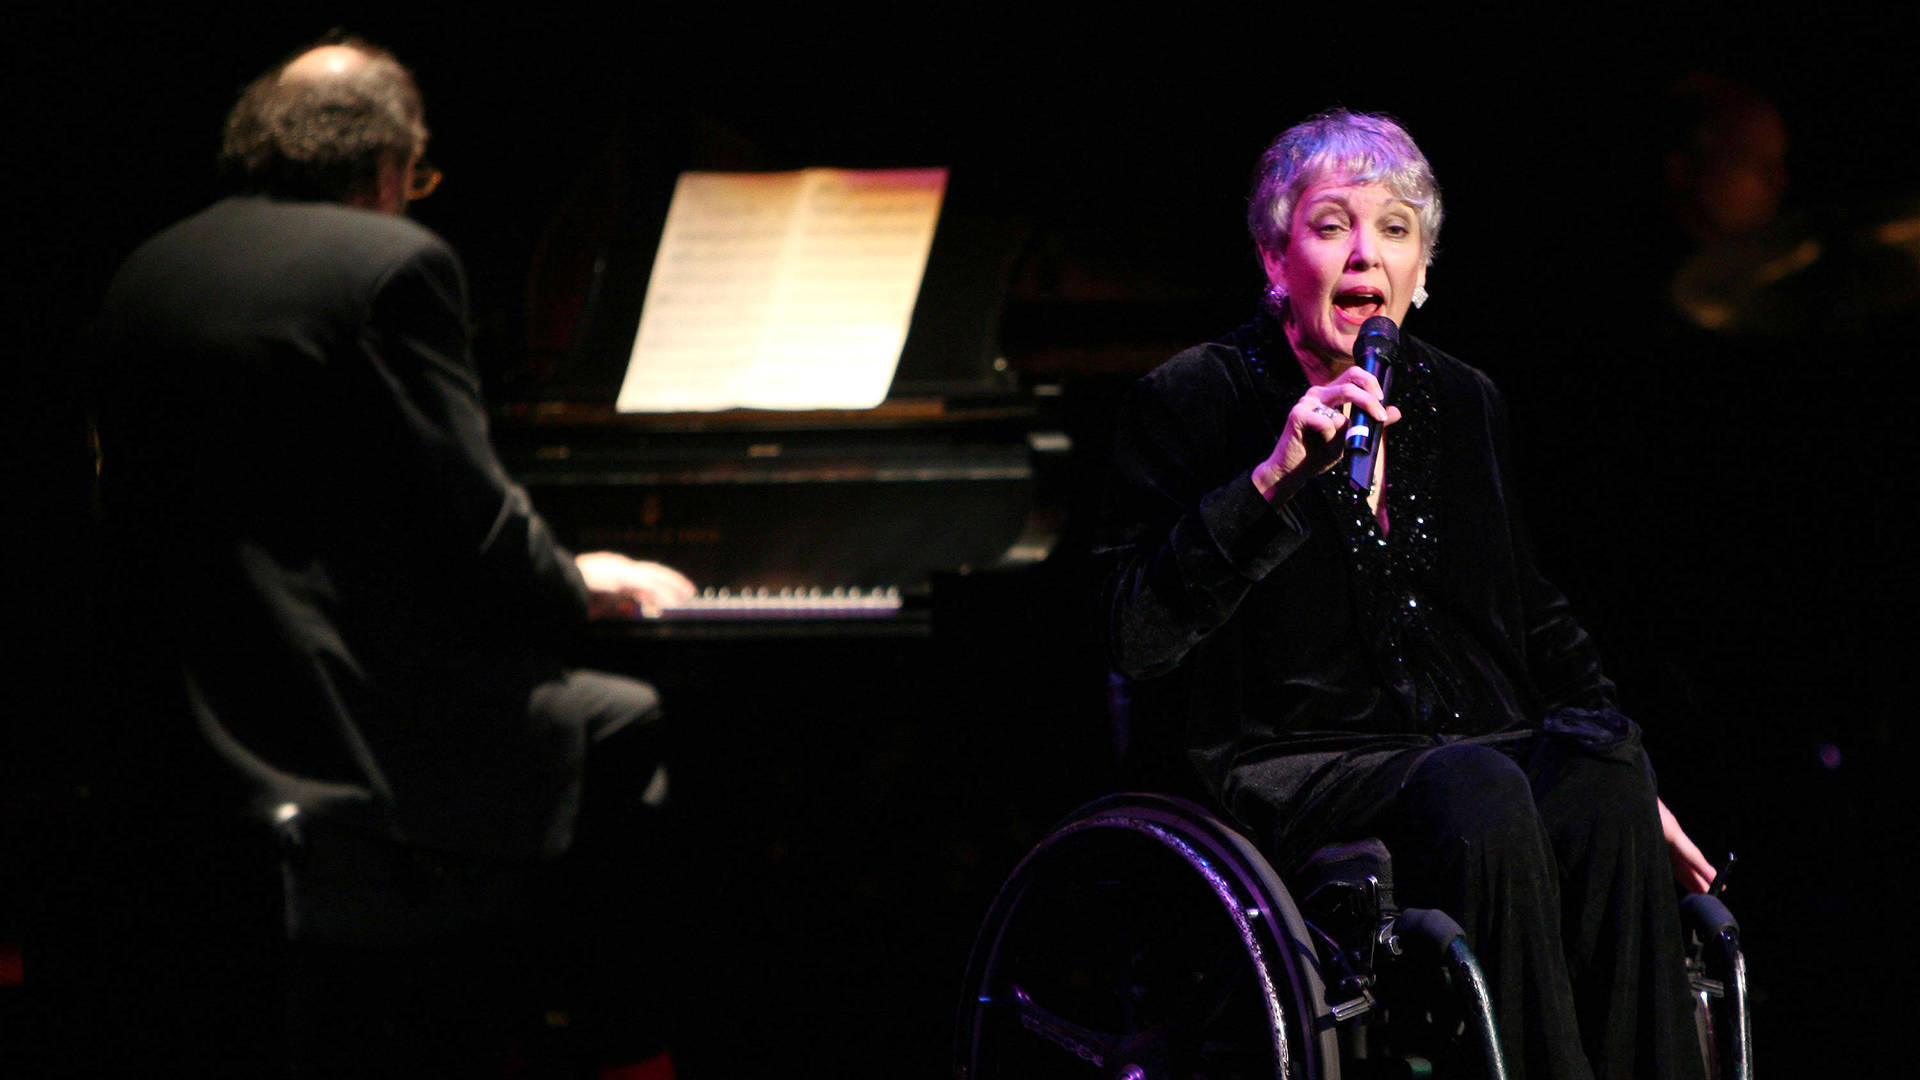 Wesla Whitfield performs at the Actor's Fund S.T.A.G.E. Too Tribute: Hooray For Love celebrating the music of Harold Arlen on November 12, 2005 in Los Angeles, California.   Photo: David Livingston/Getty Images